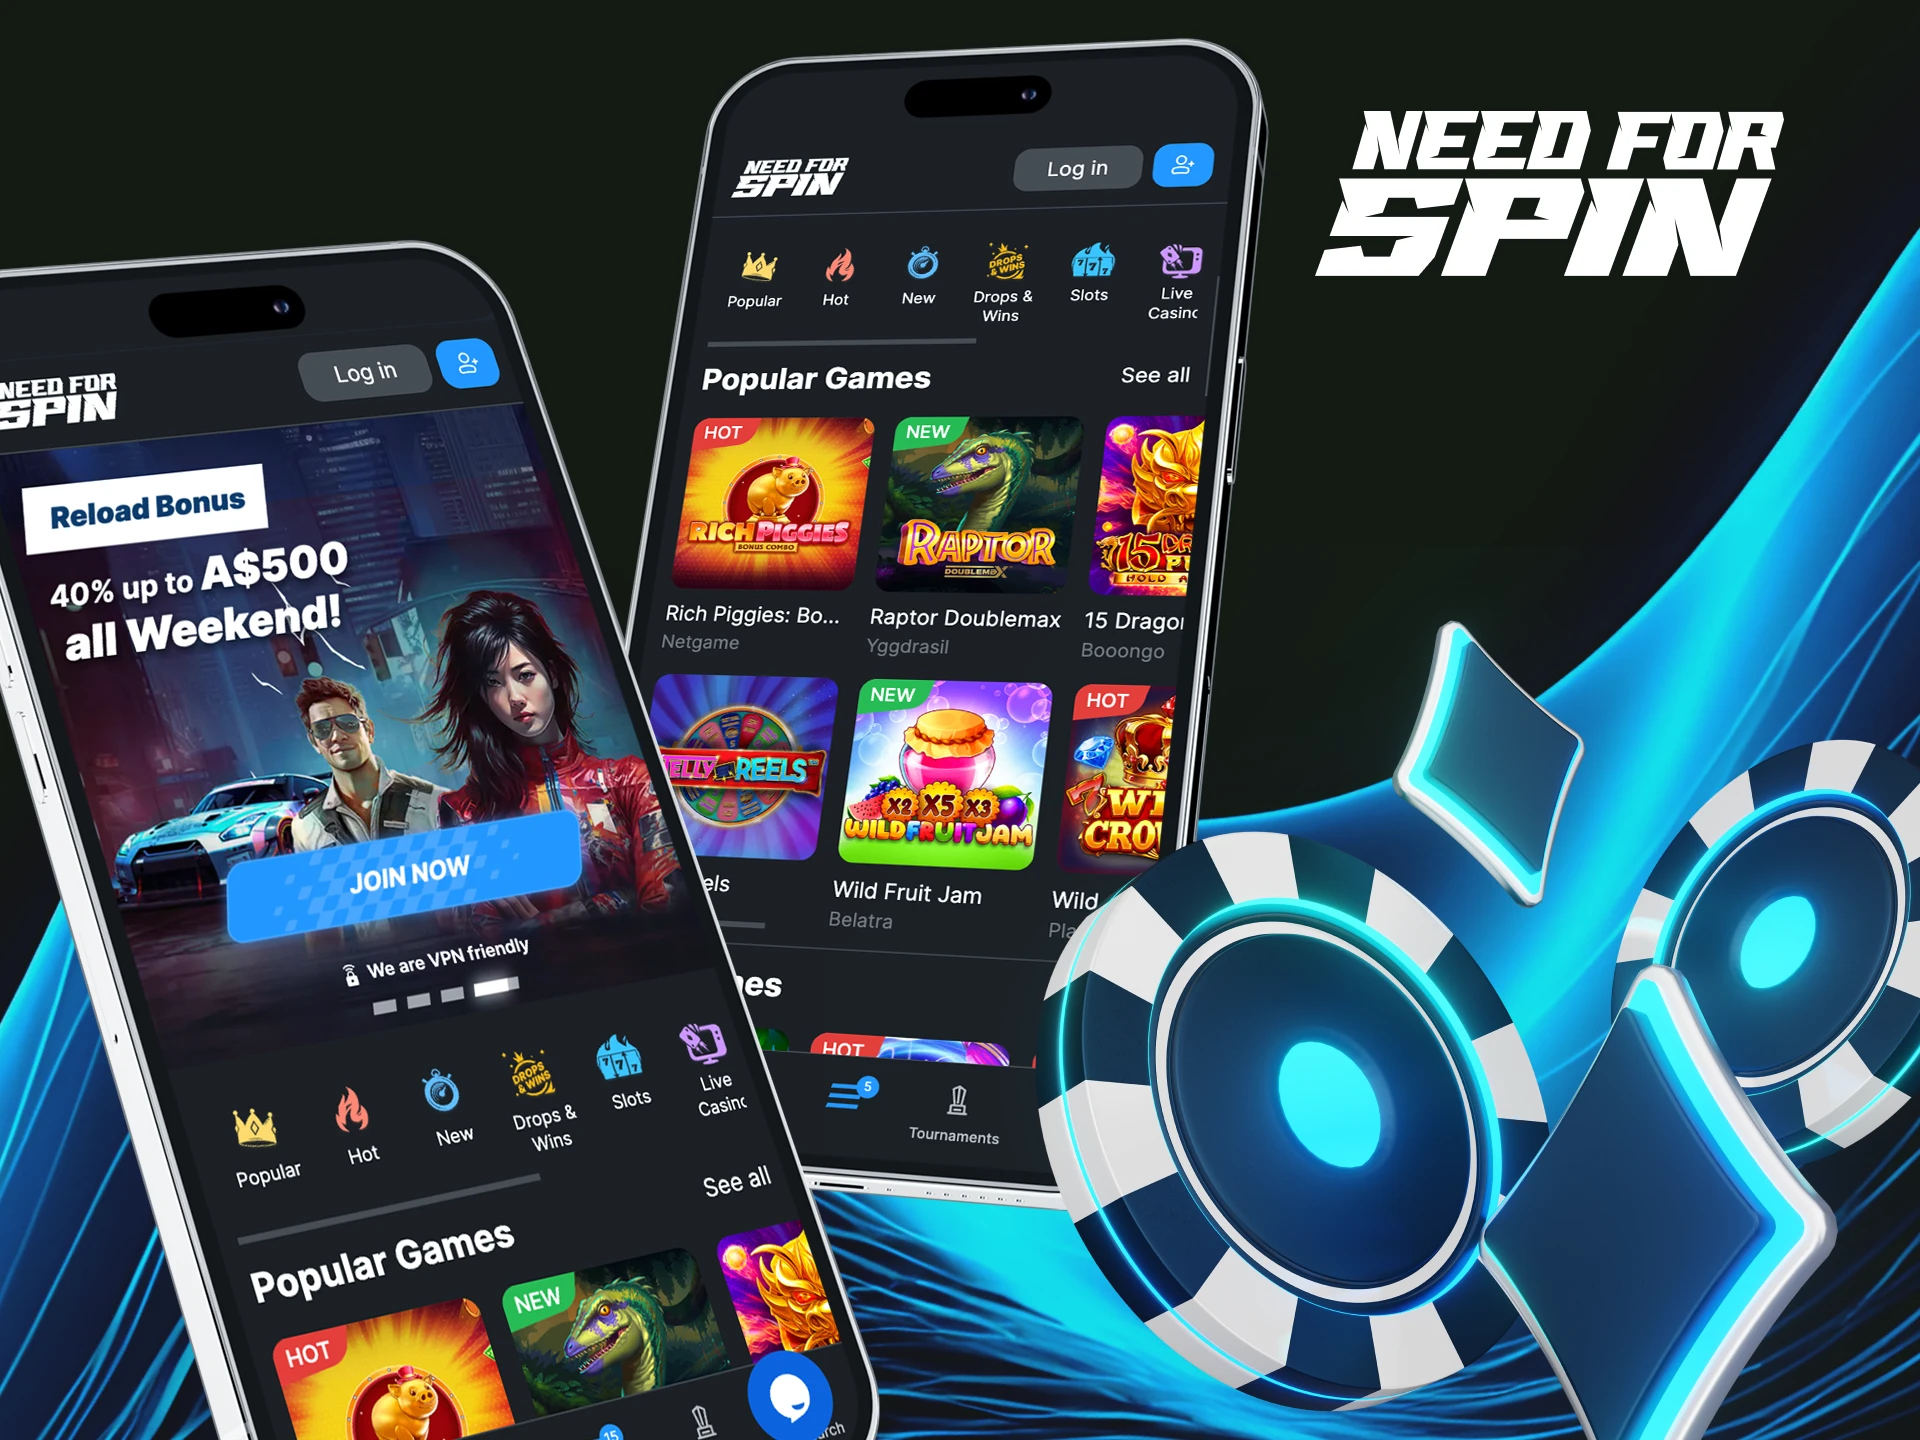 Is there a mobile version of the online casino site Need For Spin.